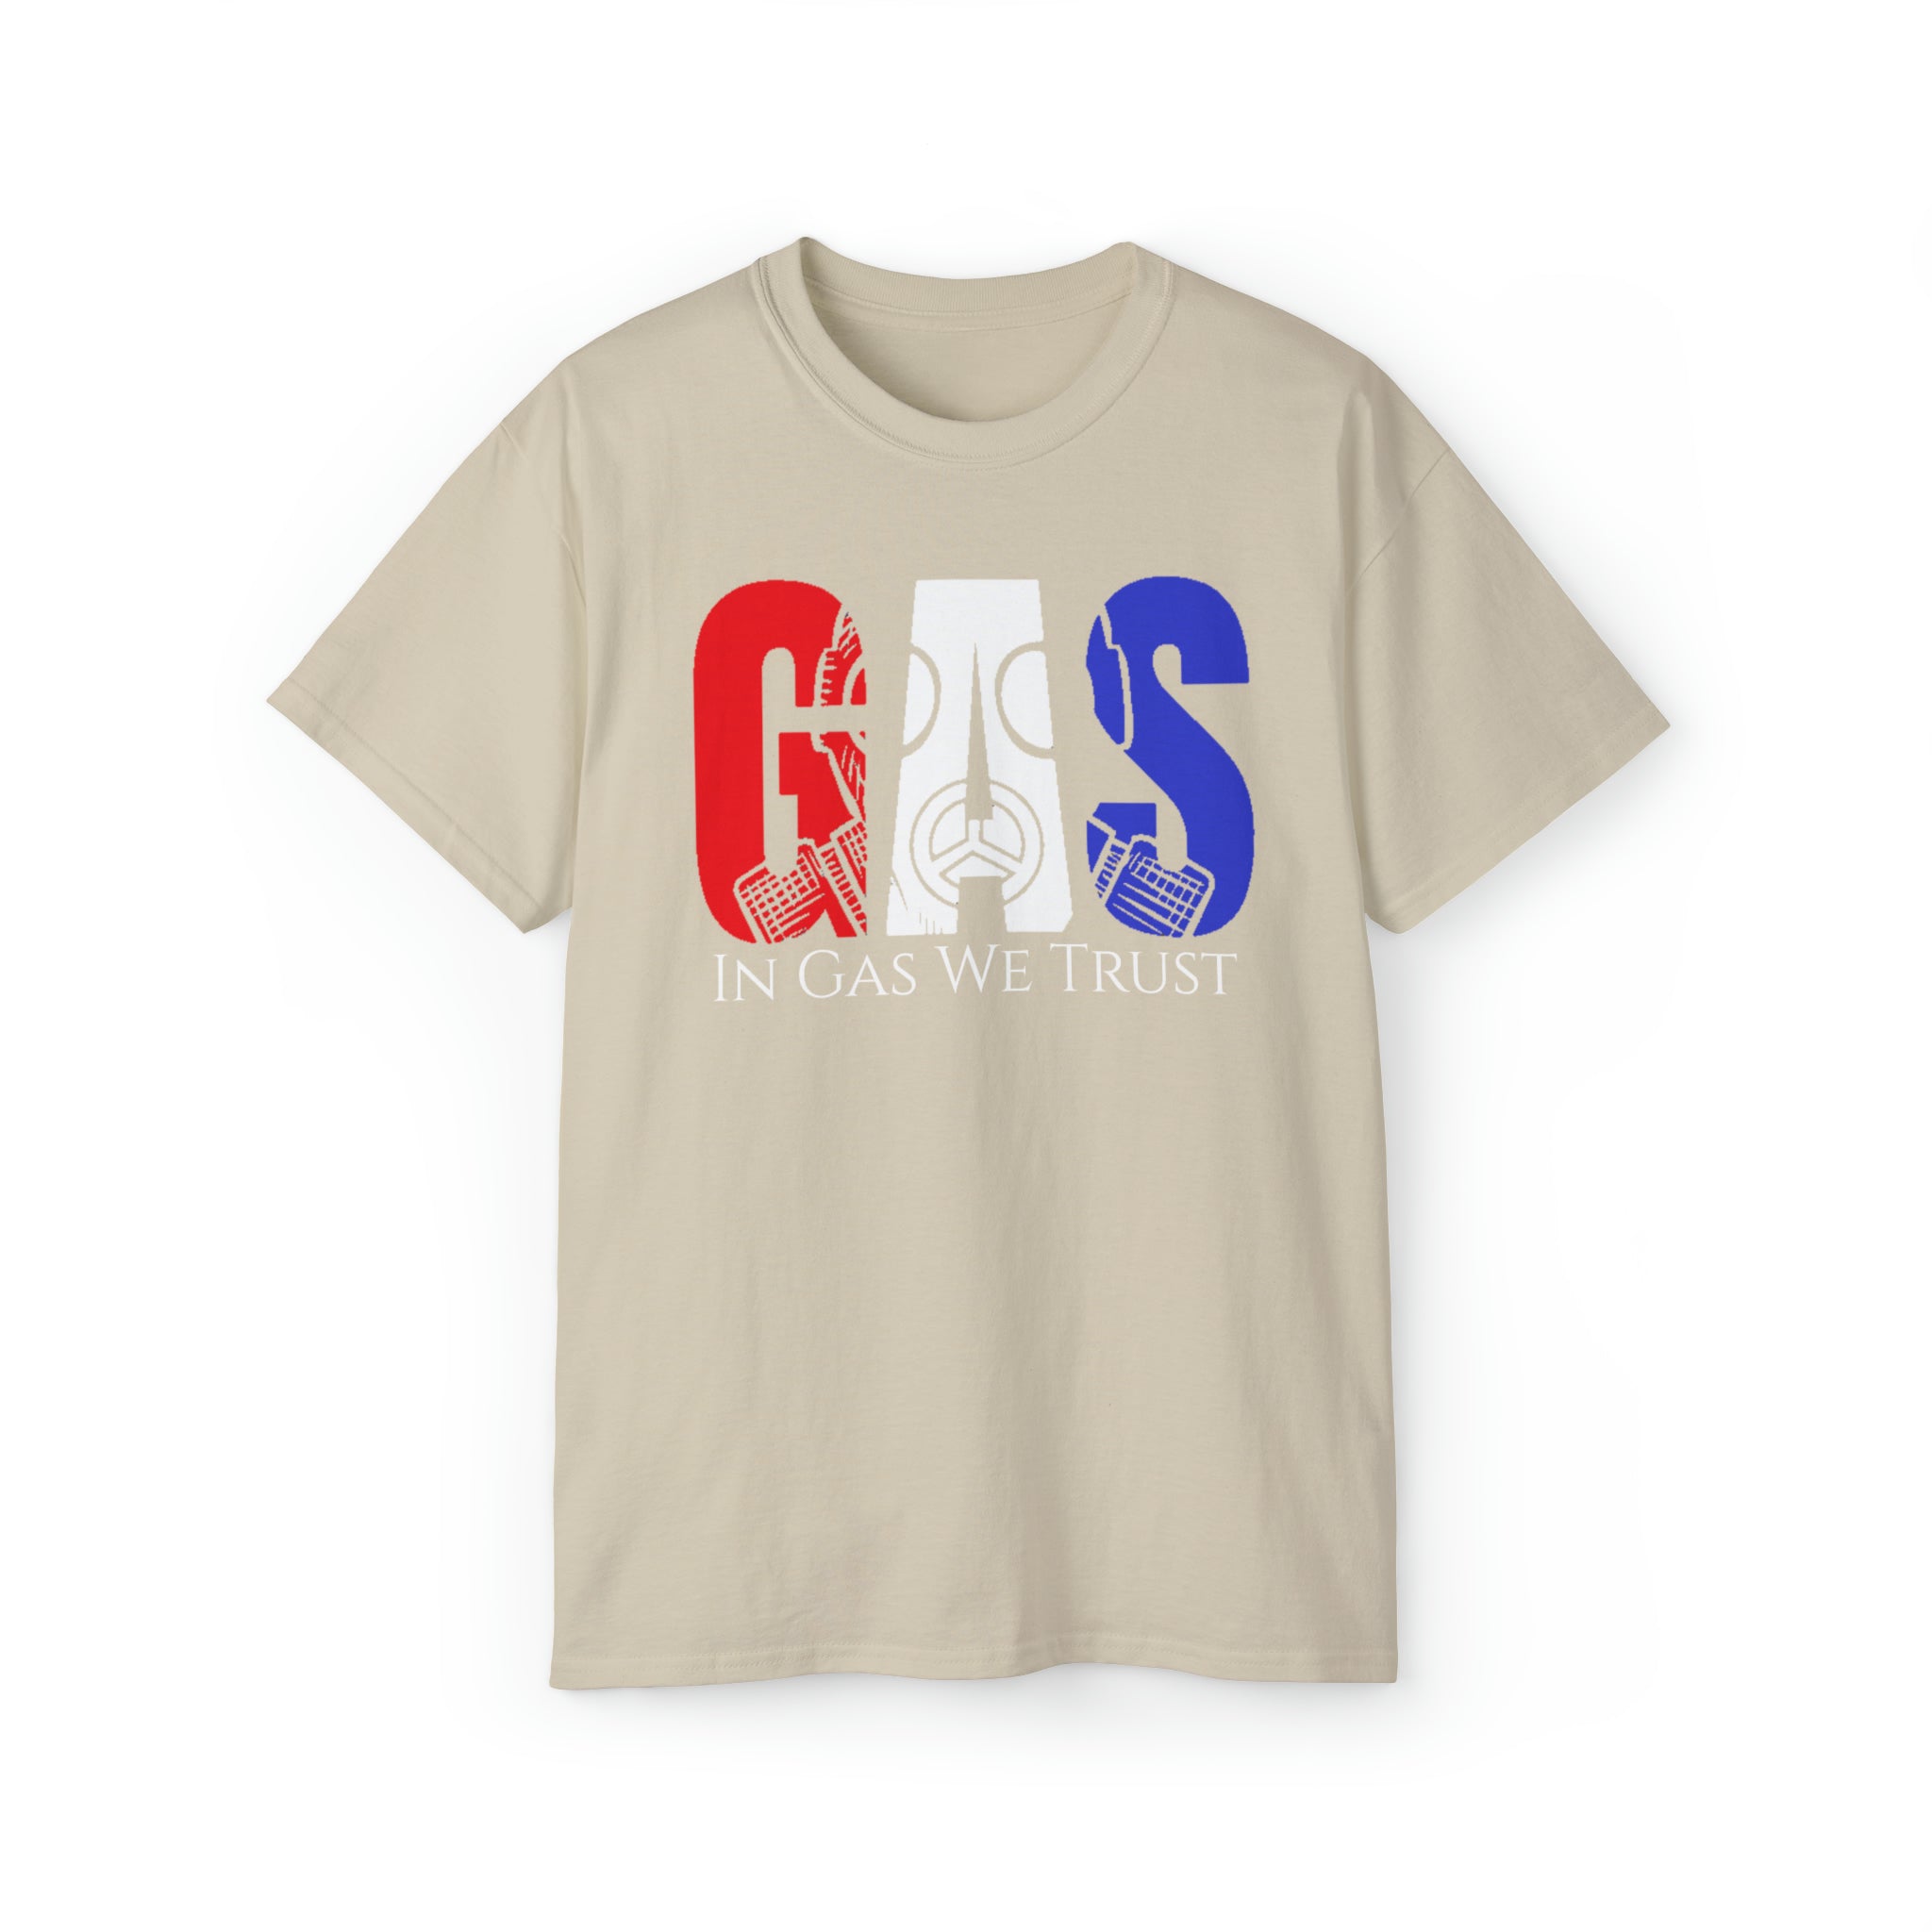 AmericanPuerto Rican Culture Colored Unisex Gas Tee